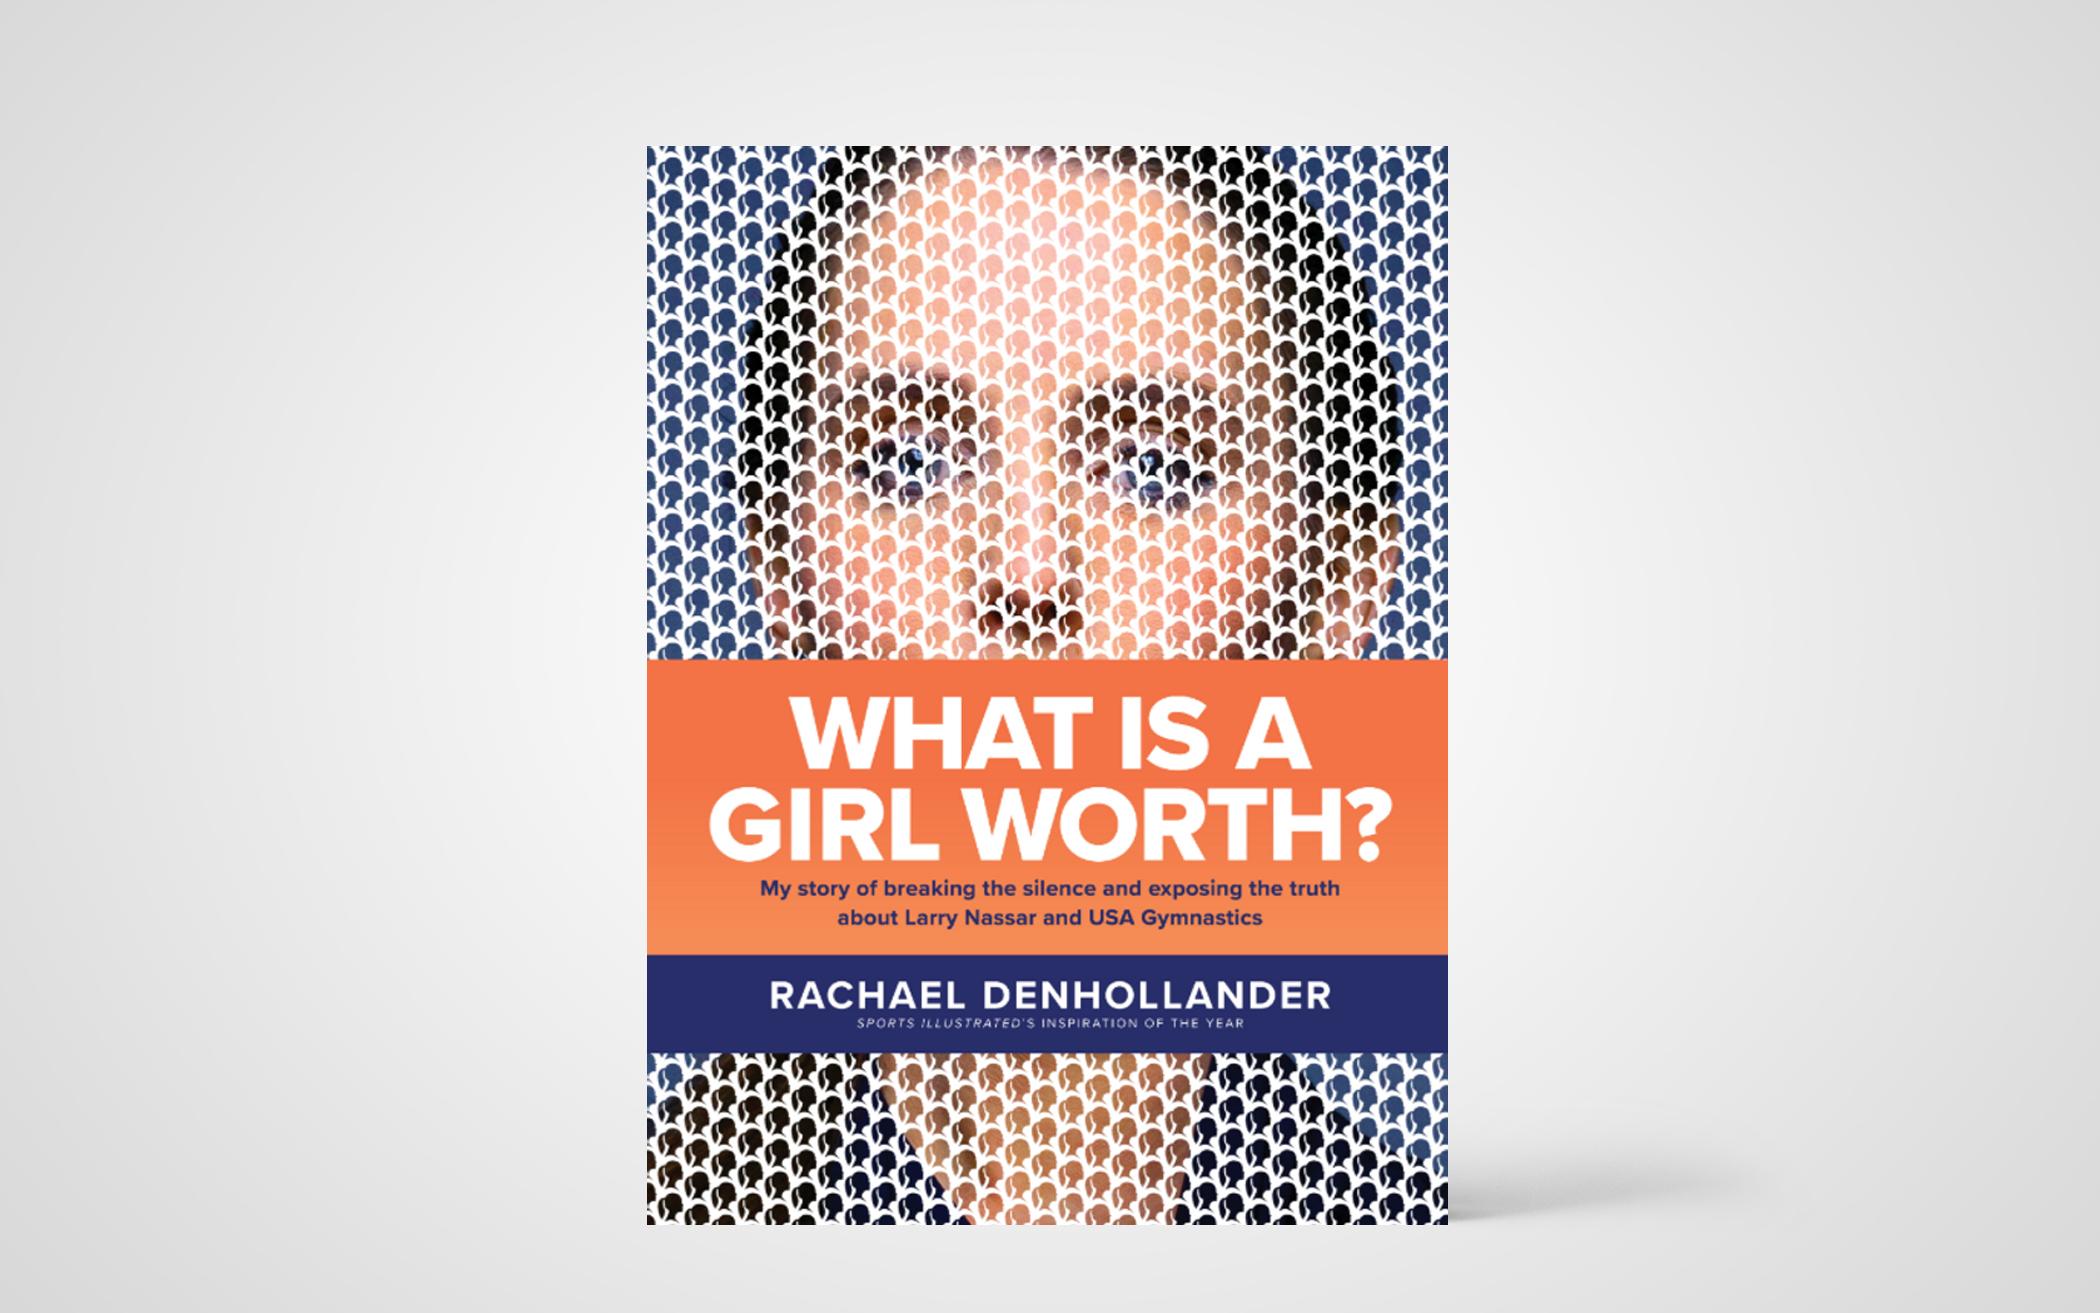 What Is A Girl Worth? My Story of Breaking the Silence and Exposing the Truth About Larry Nassar and USA Gymnastics